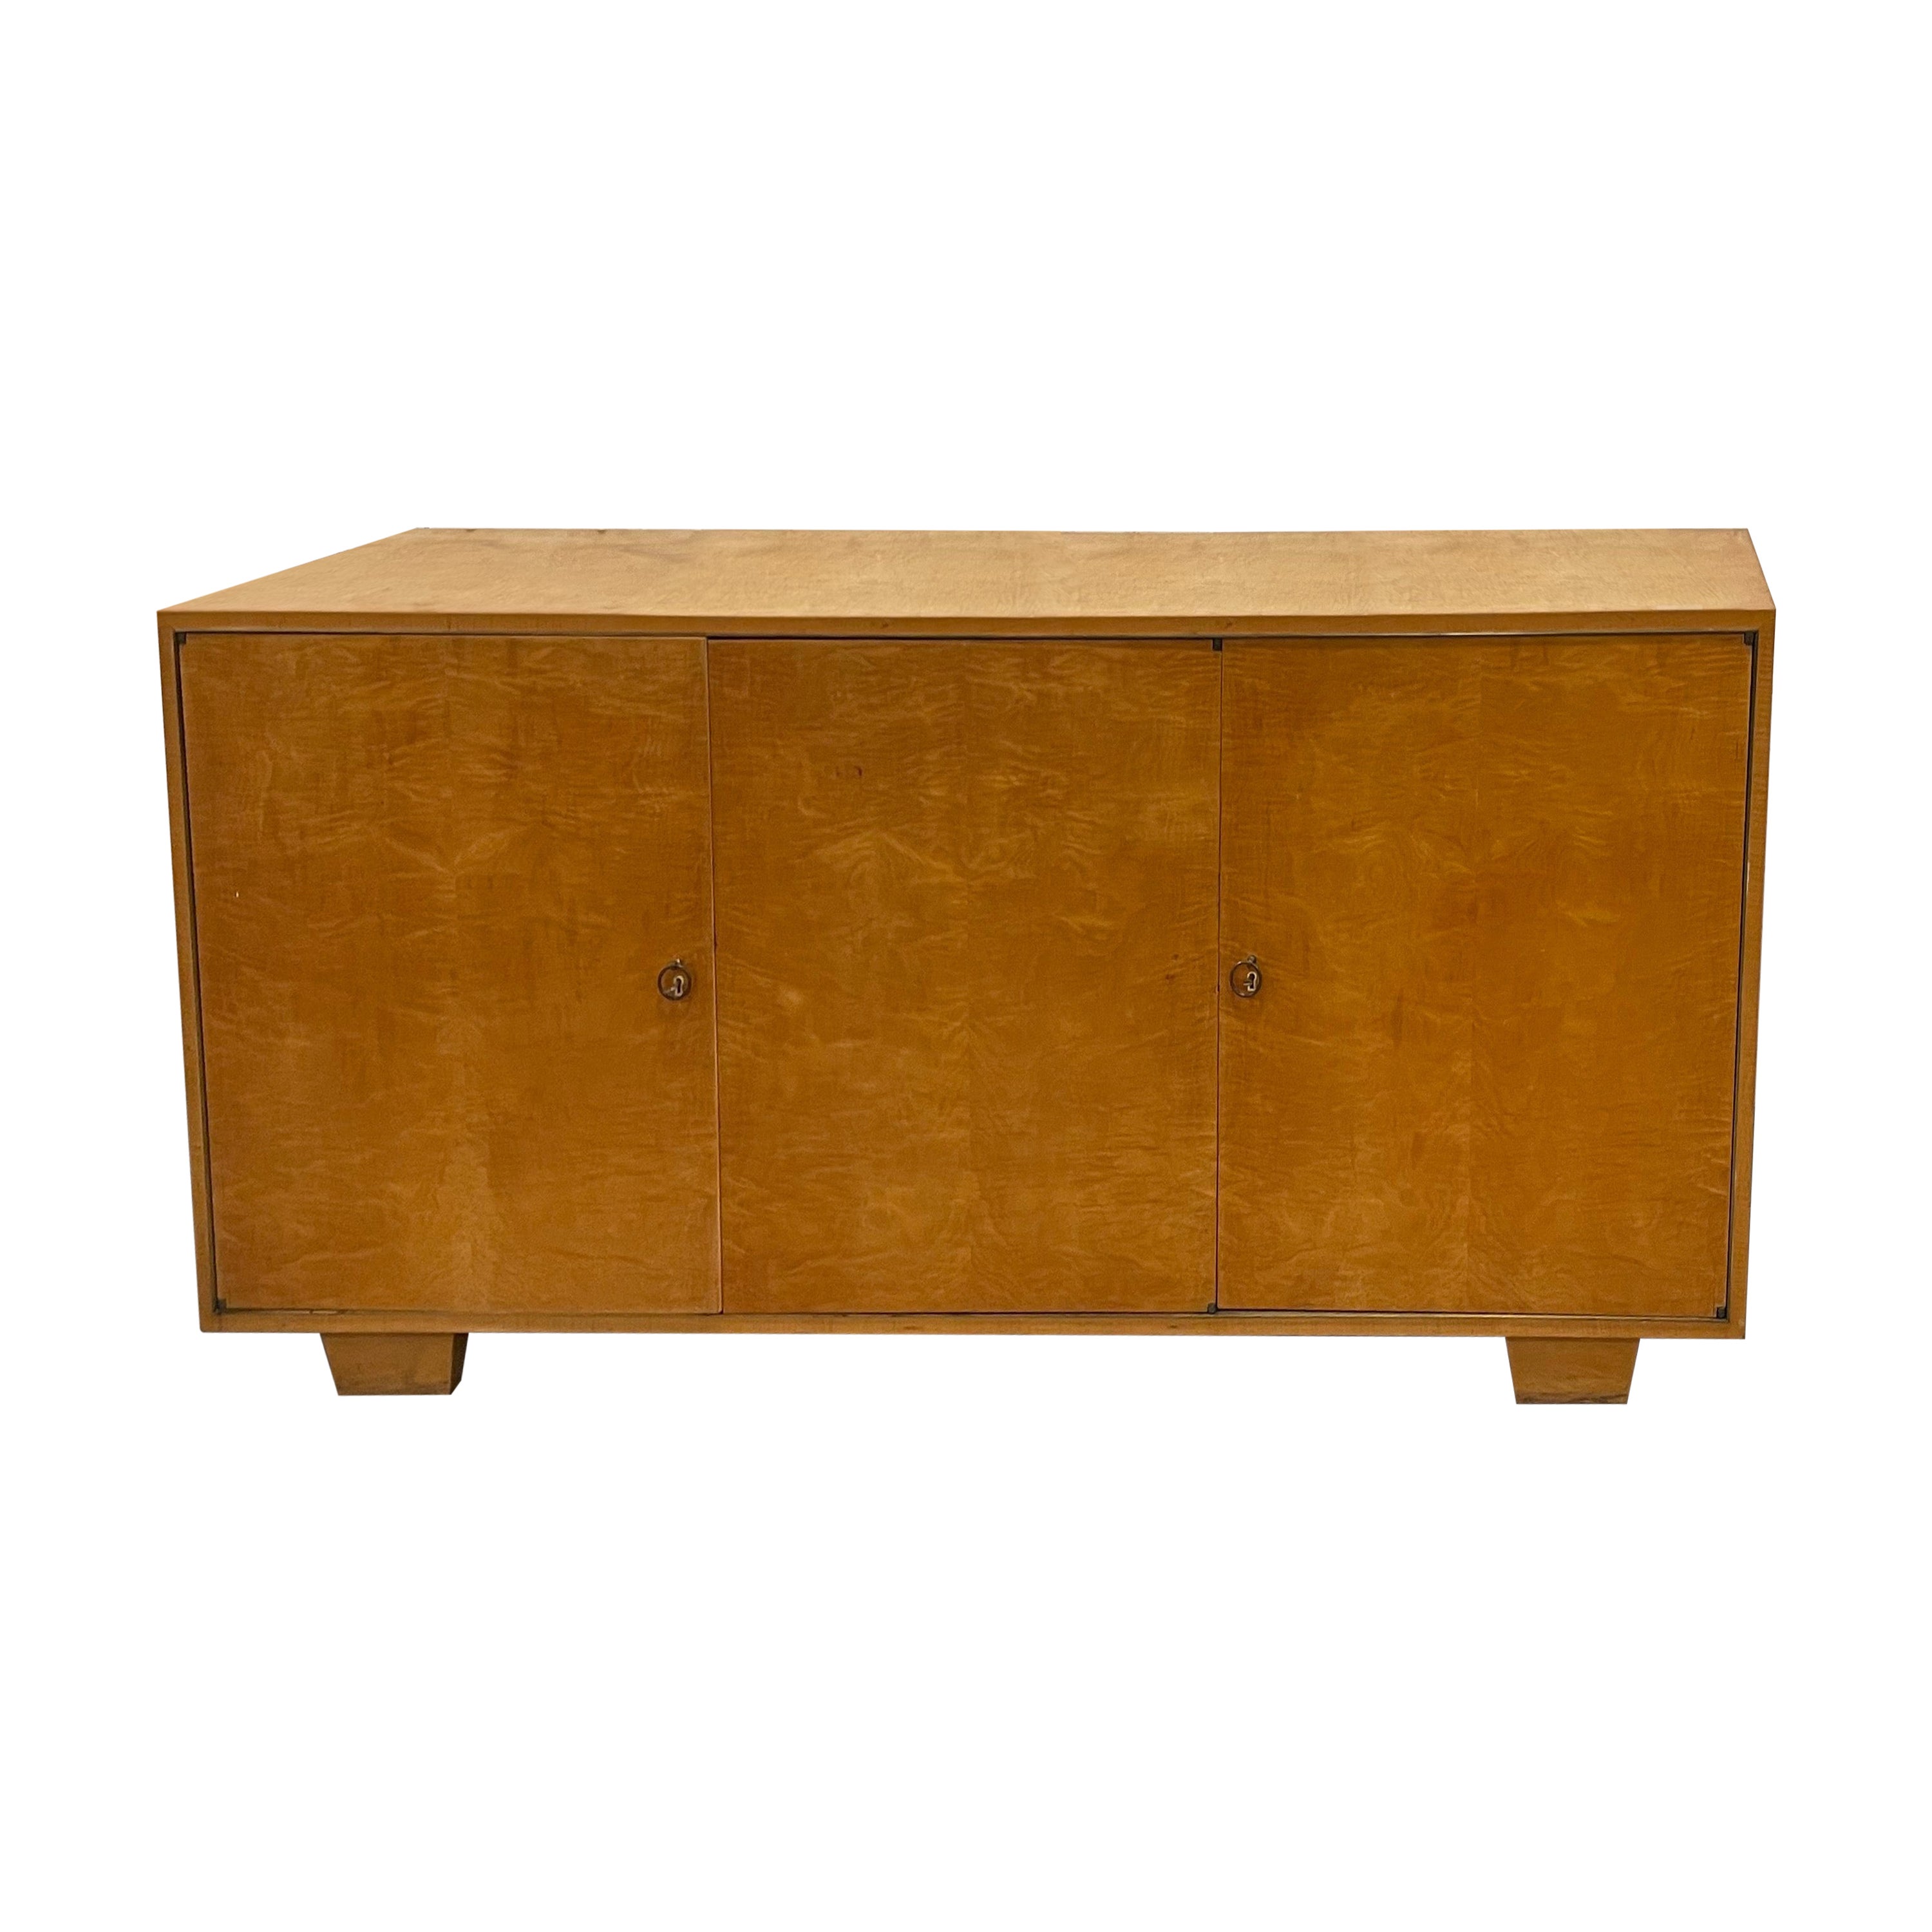 Art Deco Sycomore Sideboard With Multiple Drawers Attributed to De Coene-Belgium For Sale